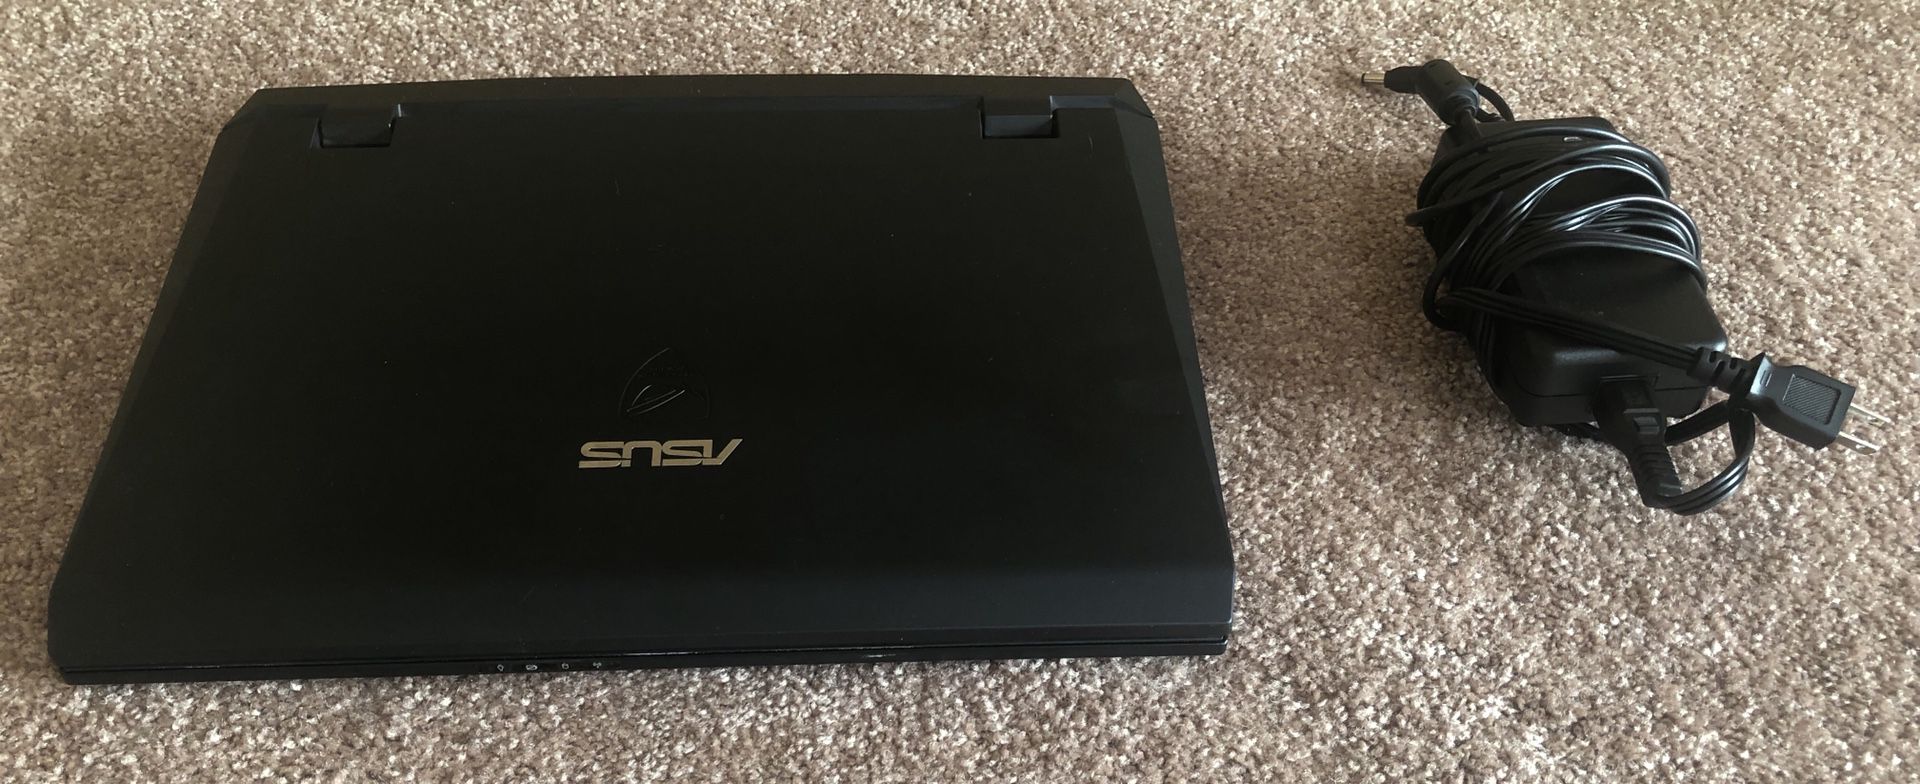 *FOR PARTS* ASUS G73SWRF-BST6 LAPTOP W/CHARGER